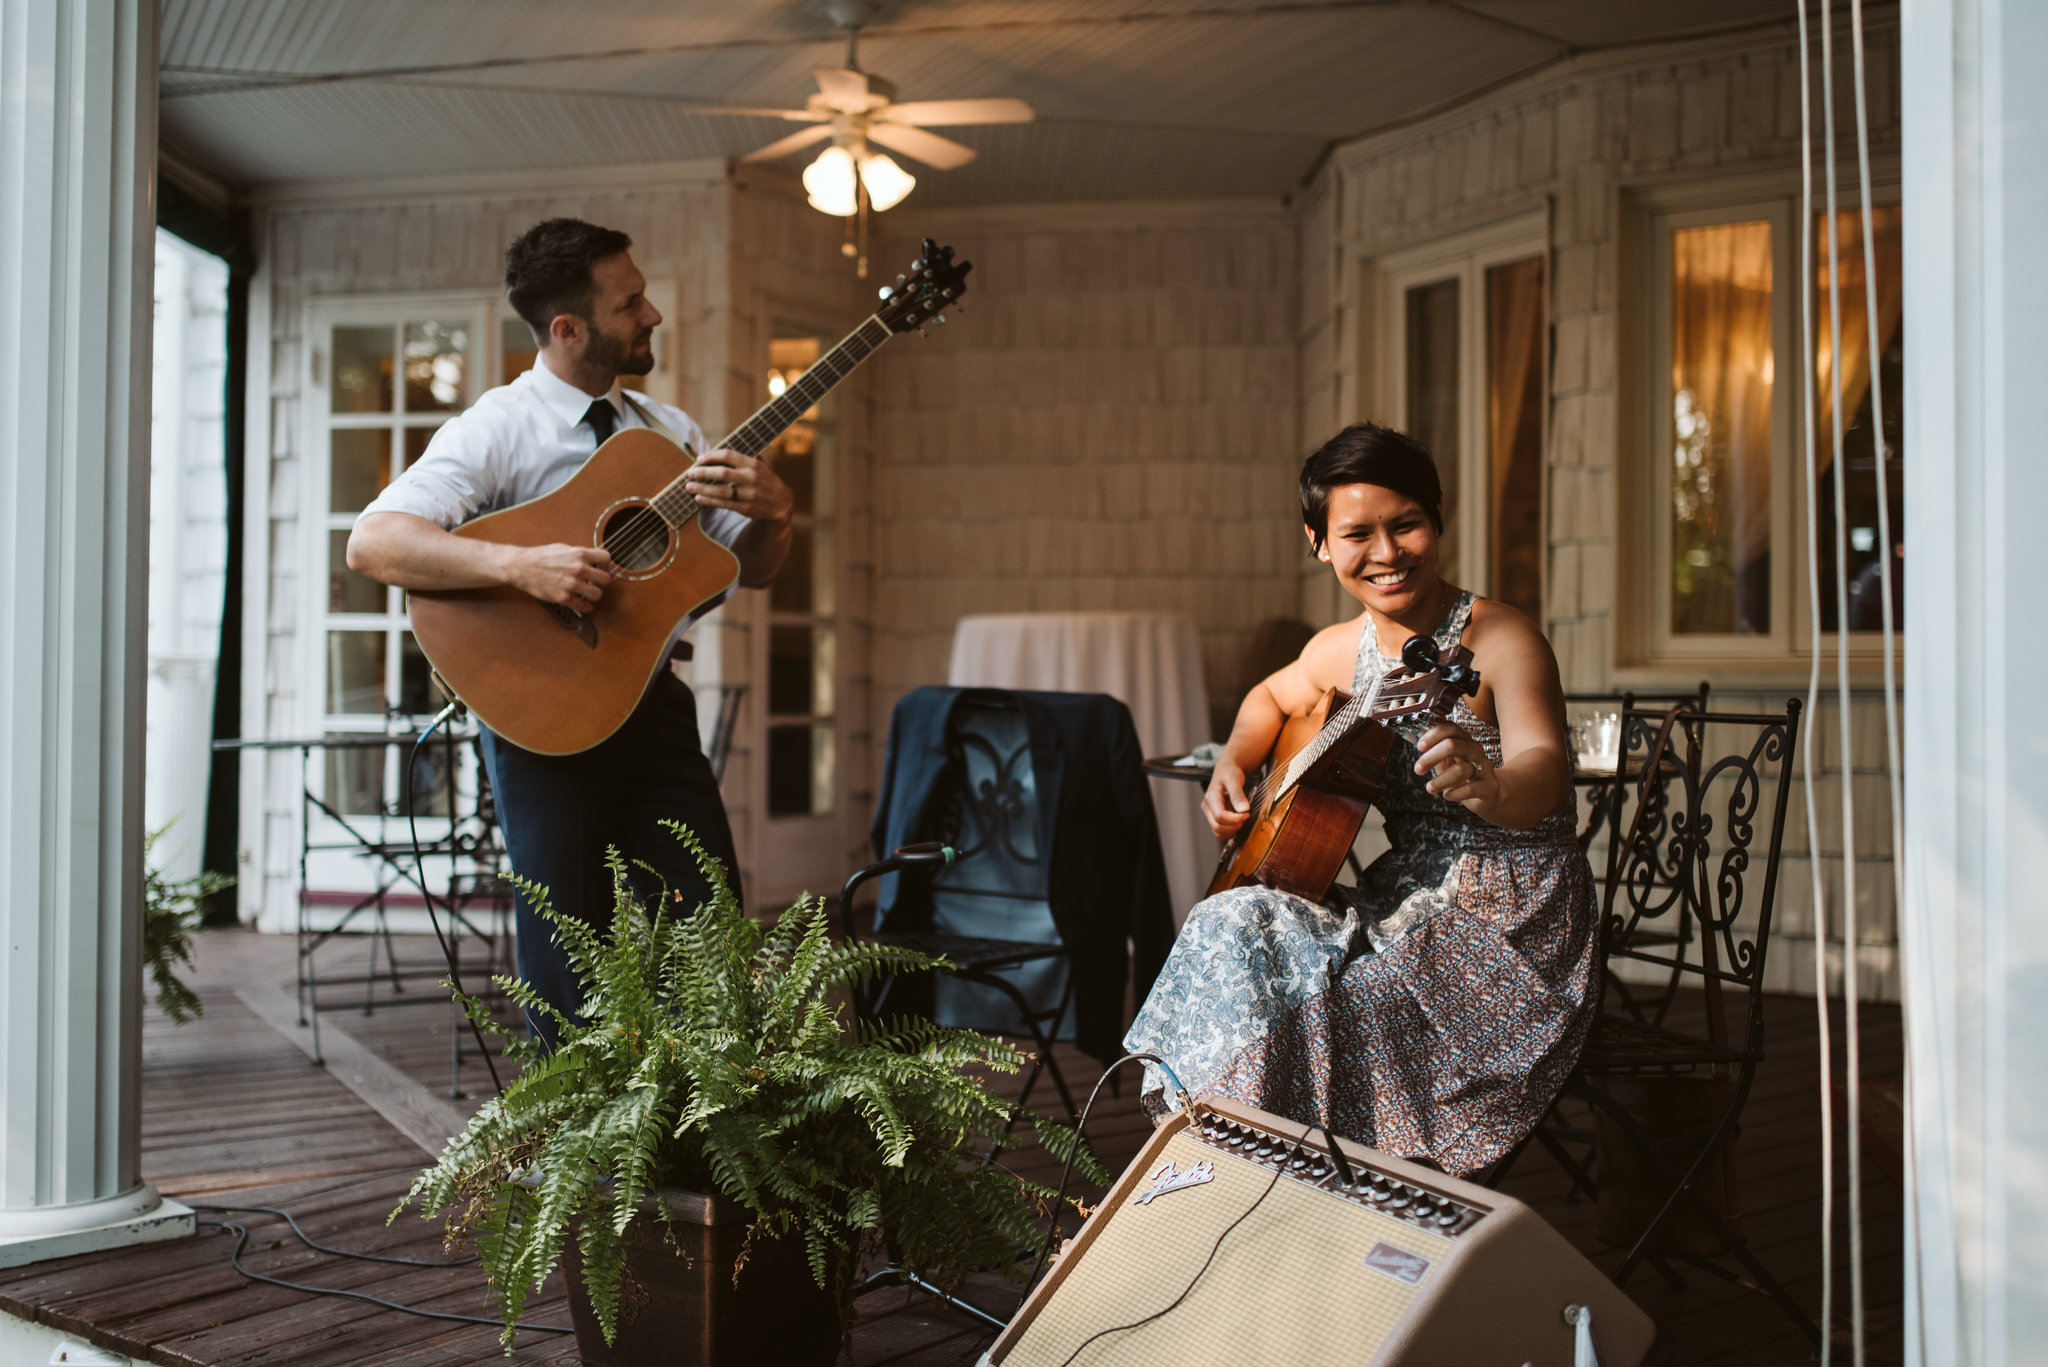  Ellicott City, Baltimore Wedding Photographer, Wayside Inn, Summer Wedding, Romantic, Traditional, Musicians Playing on Porch at Ceremony 